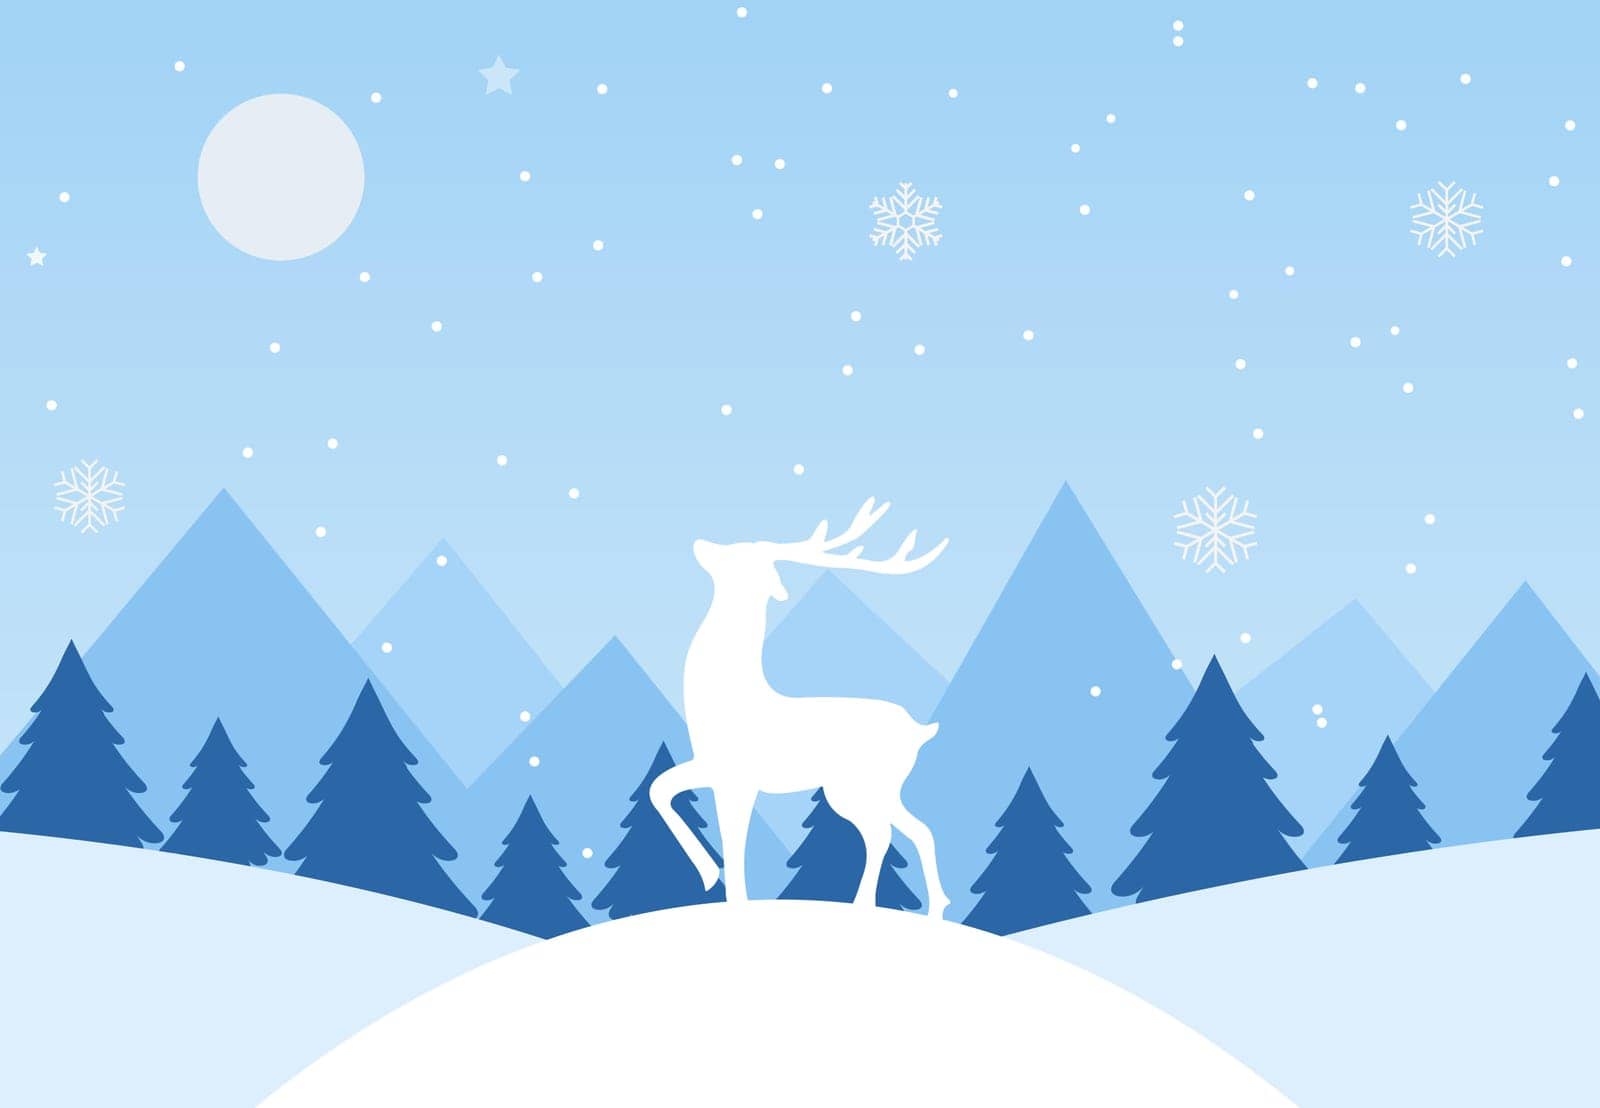 Vector winter landscape with mountains, forest, snowdrifts and deer. Winter greeting card. by Vovmar